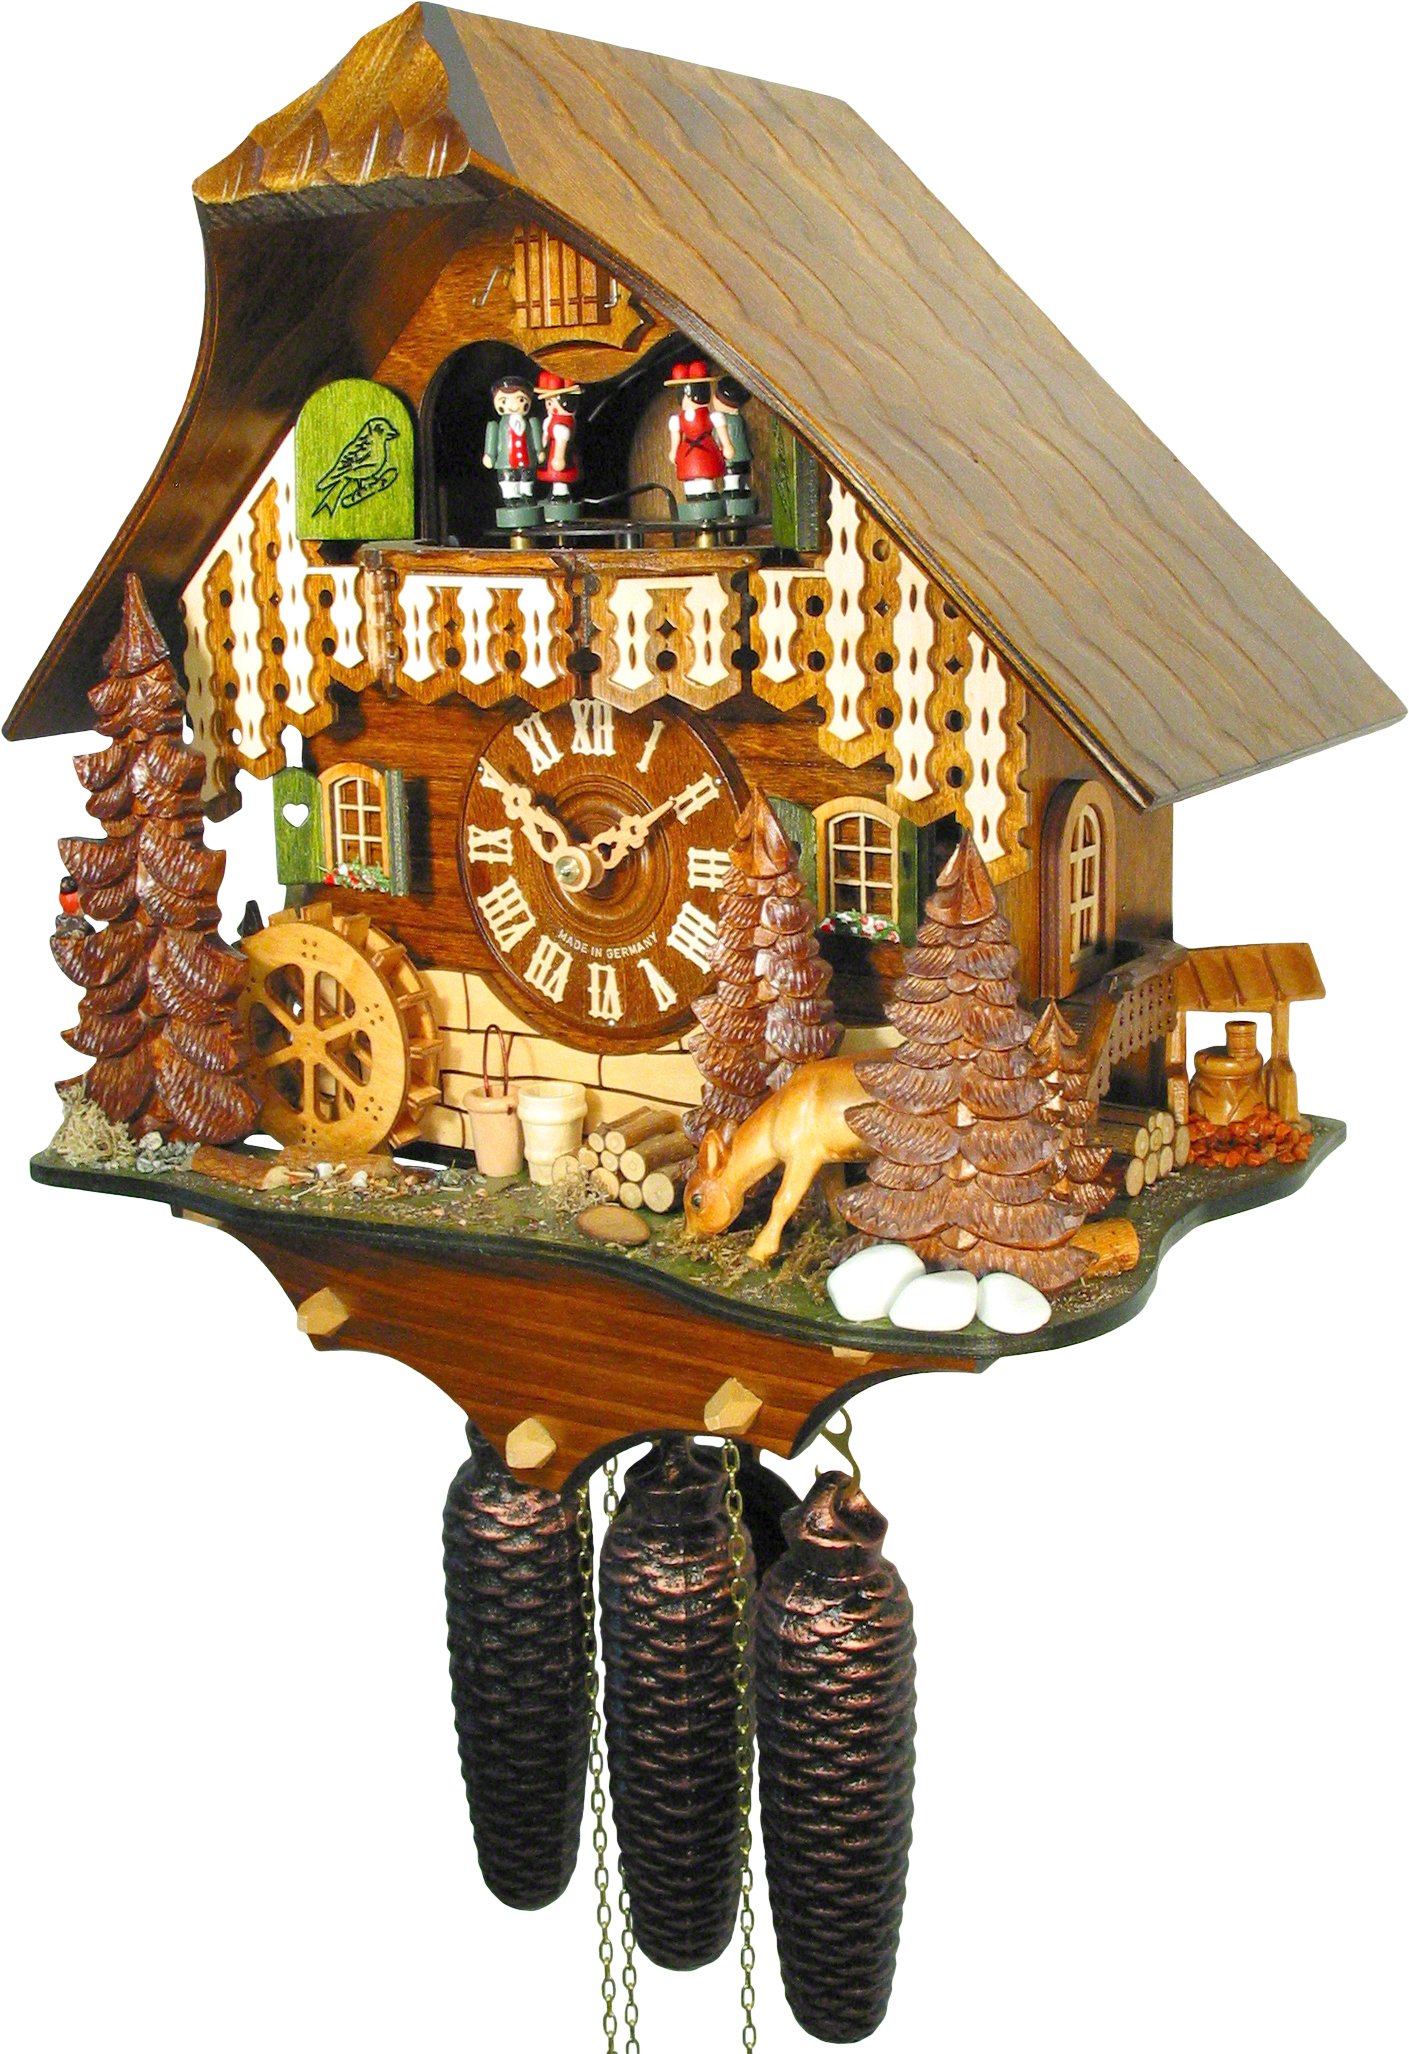 Cuckoo Clock Chalet Style 8 Day Movement 35cm by August Schwer